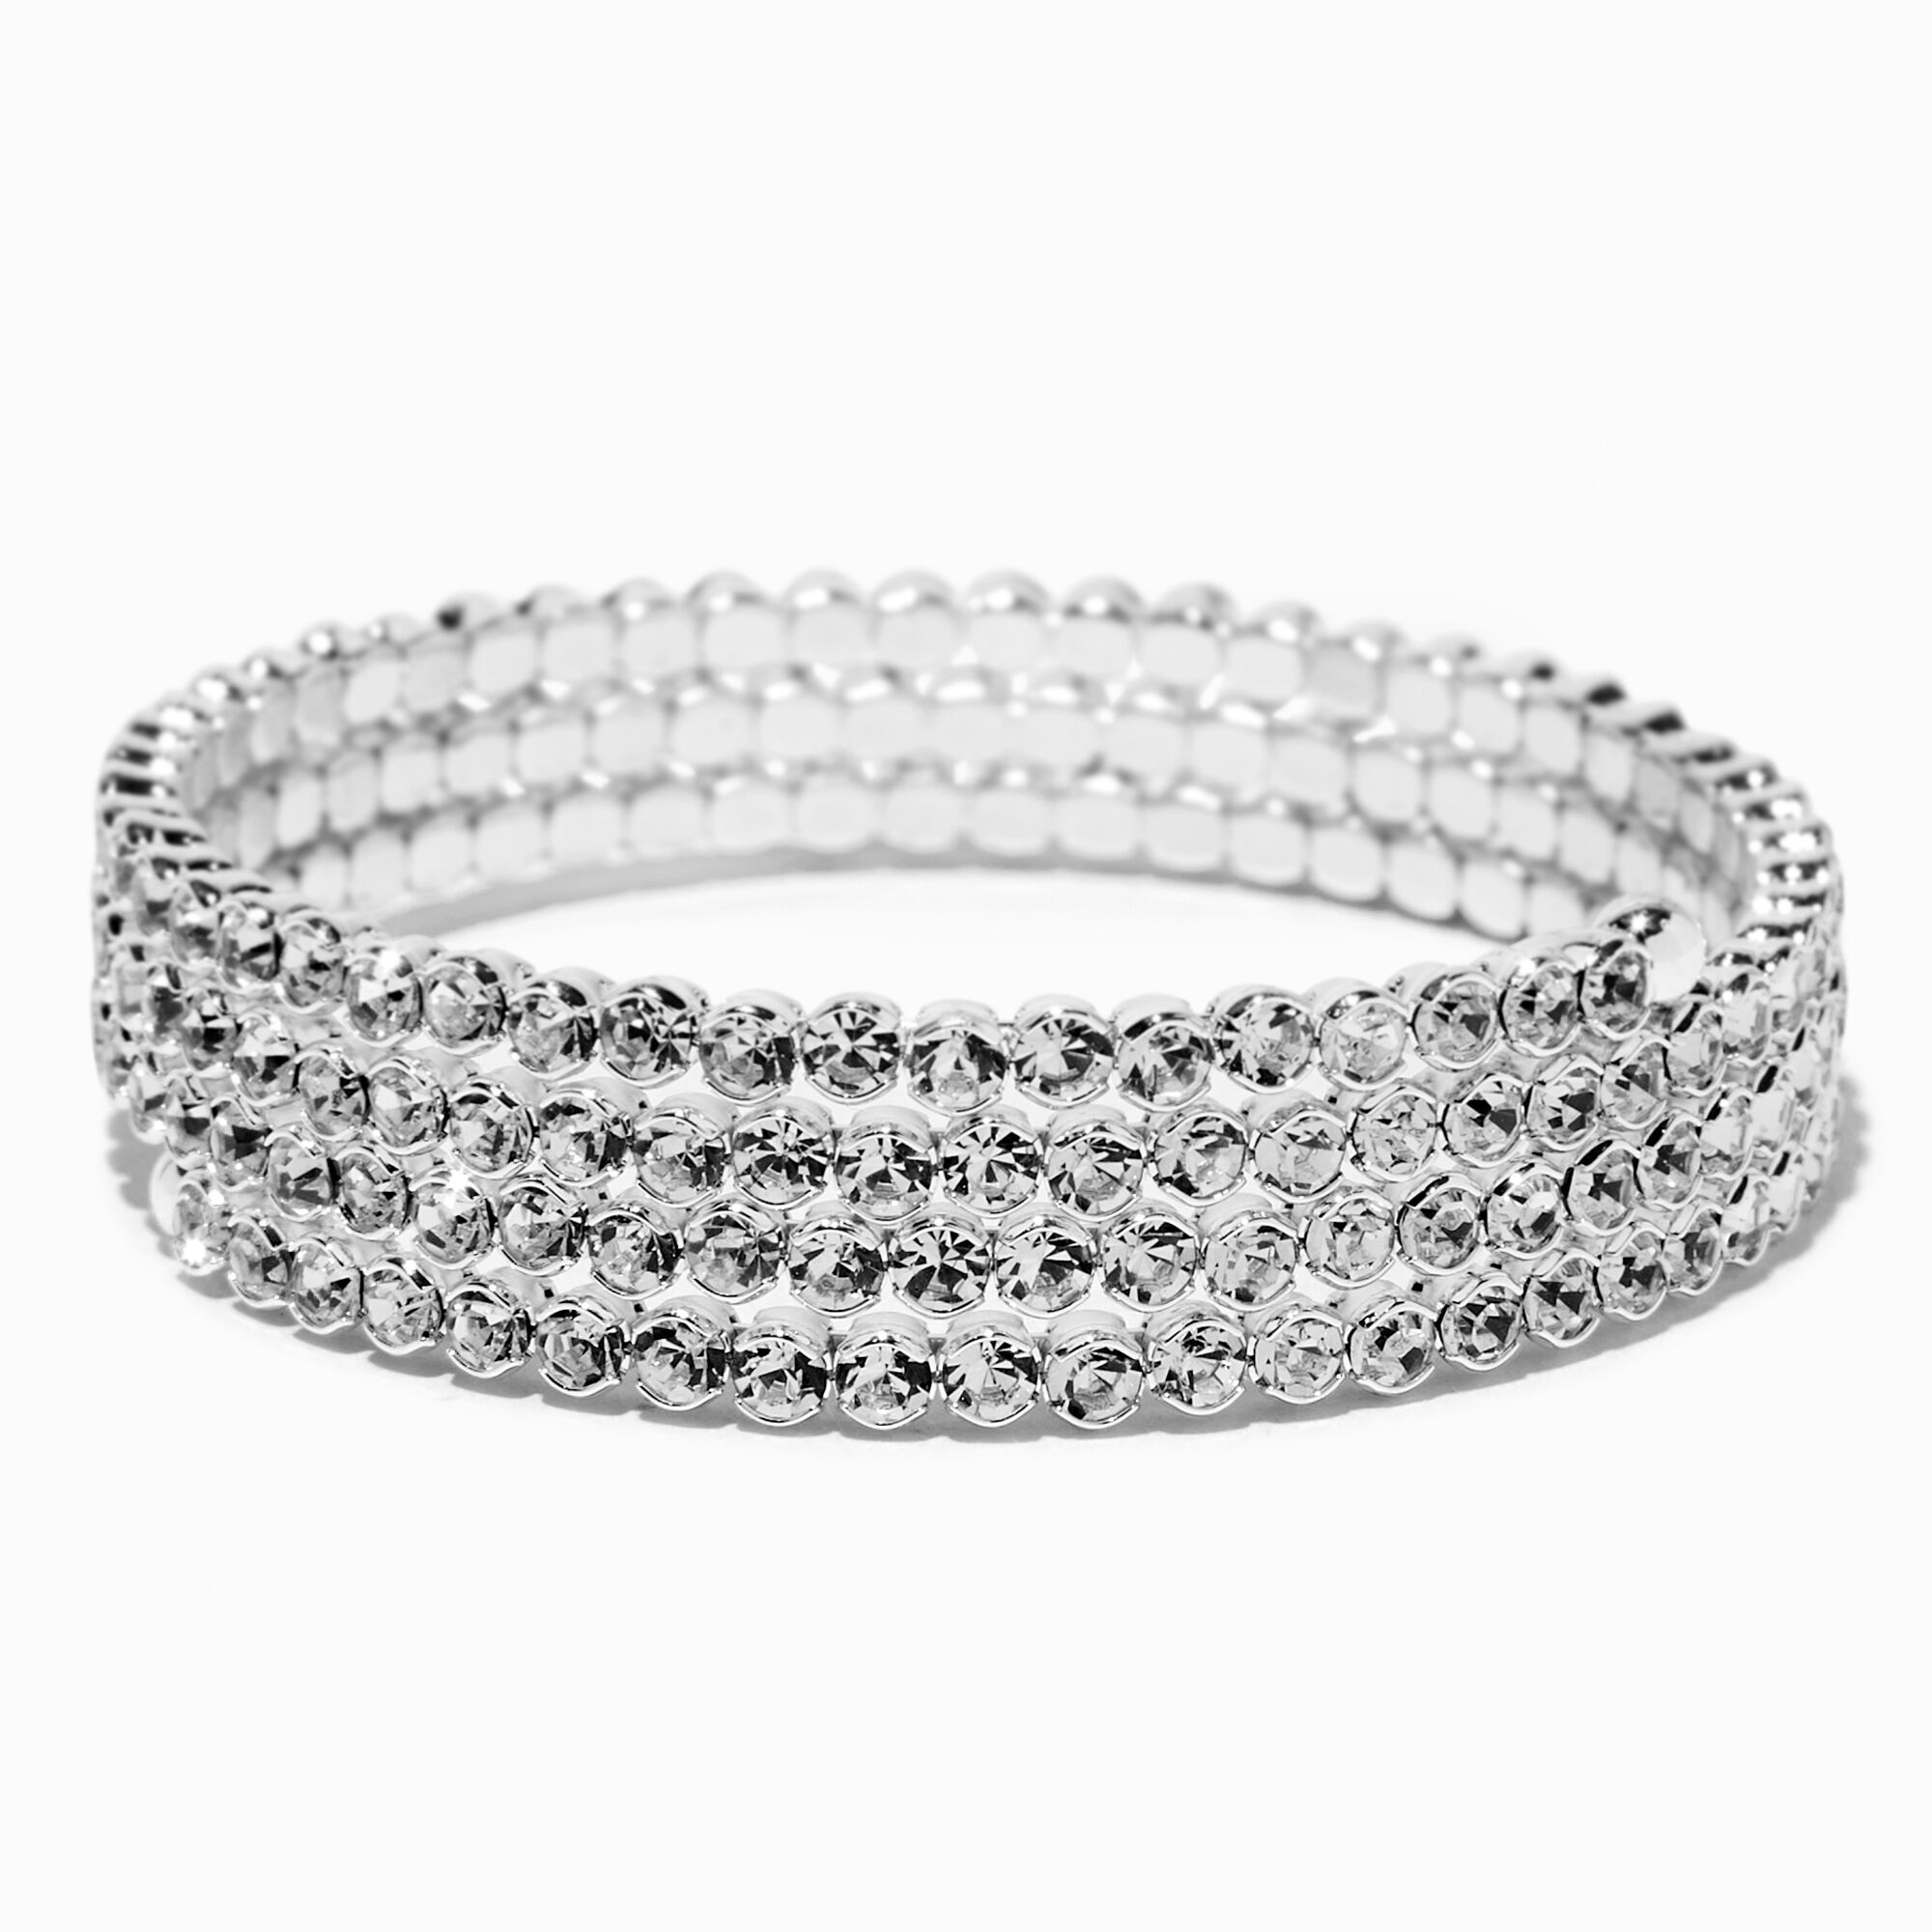 View Claires Tone Rhinestone Bevel Coil Bracelet Silver information